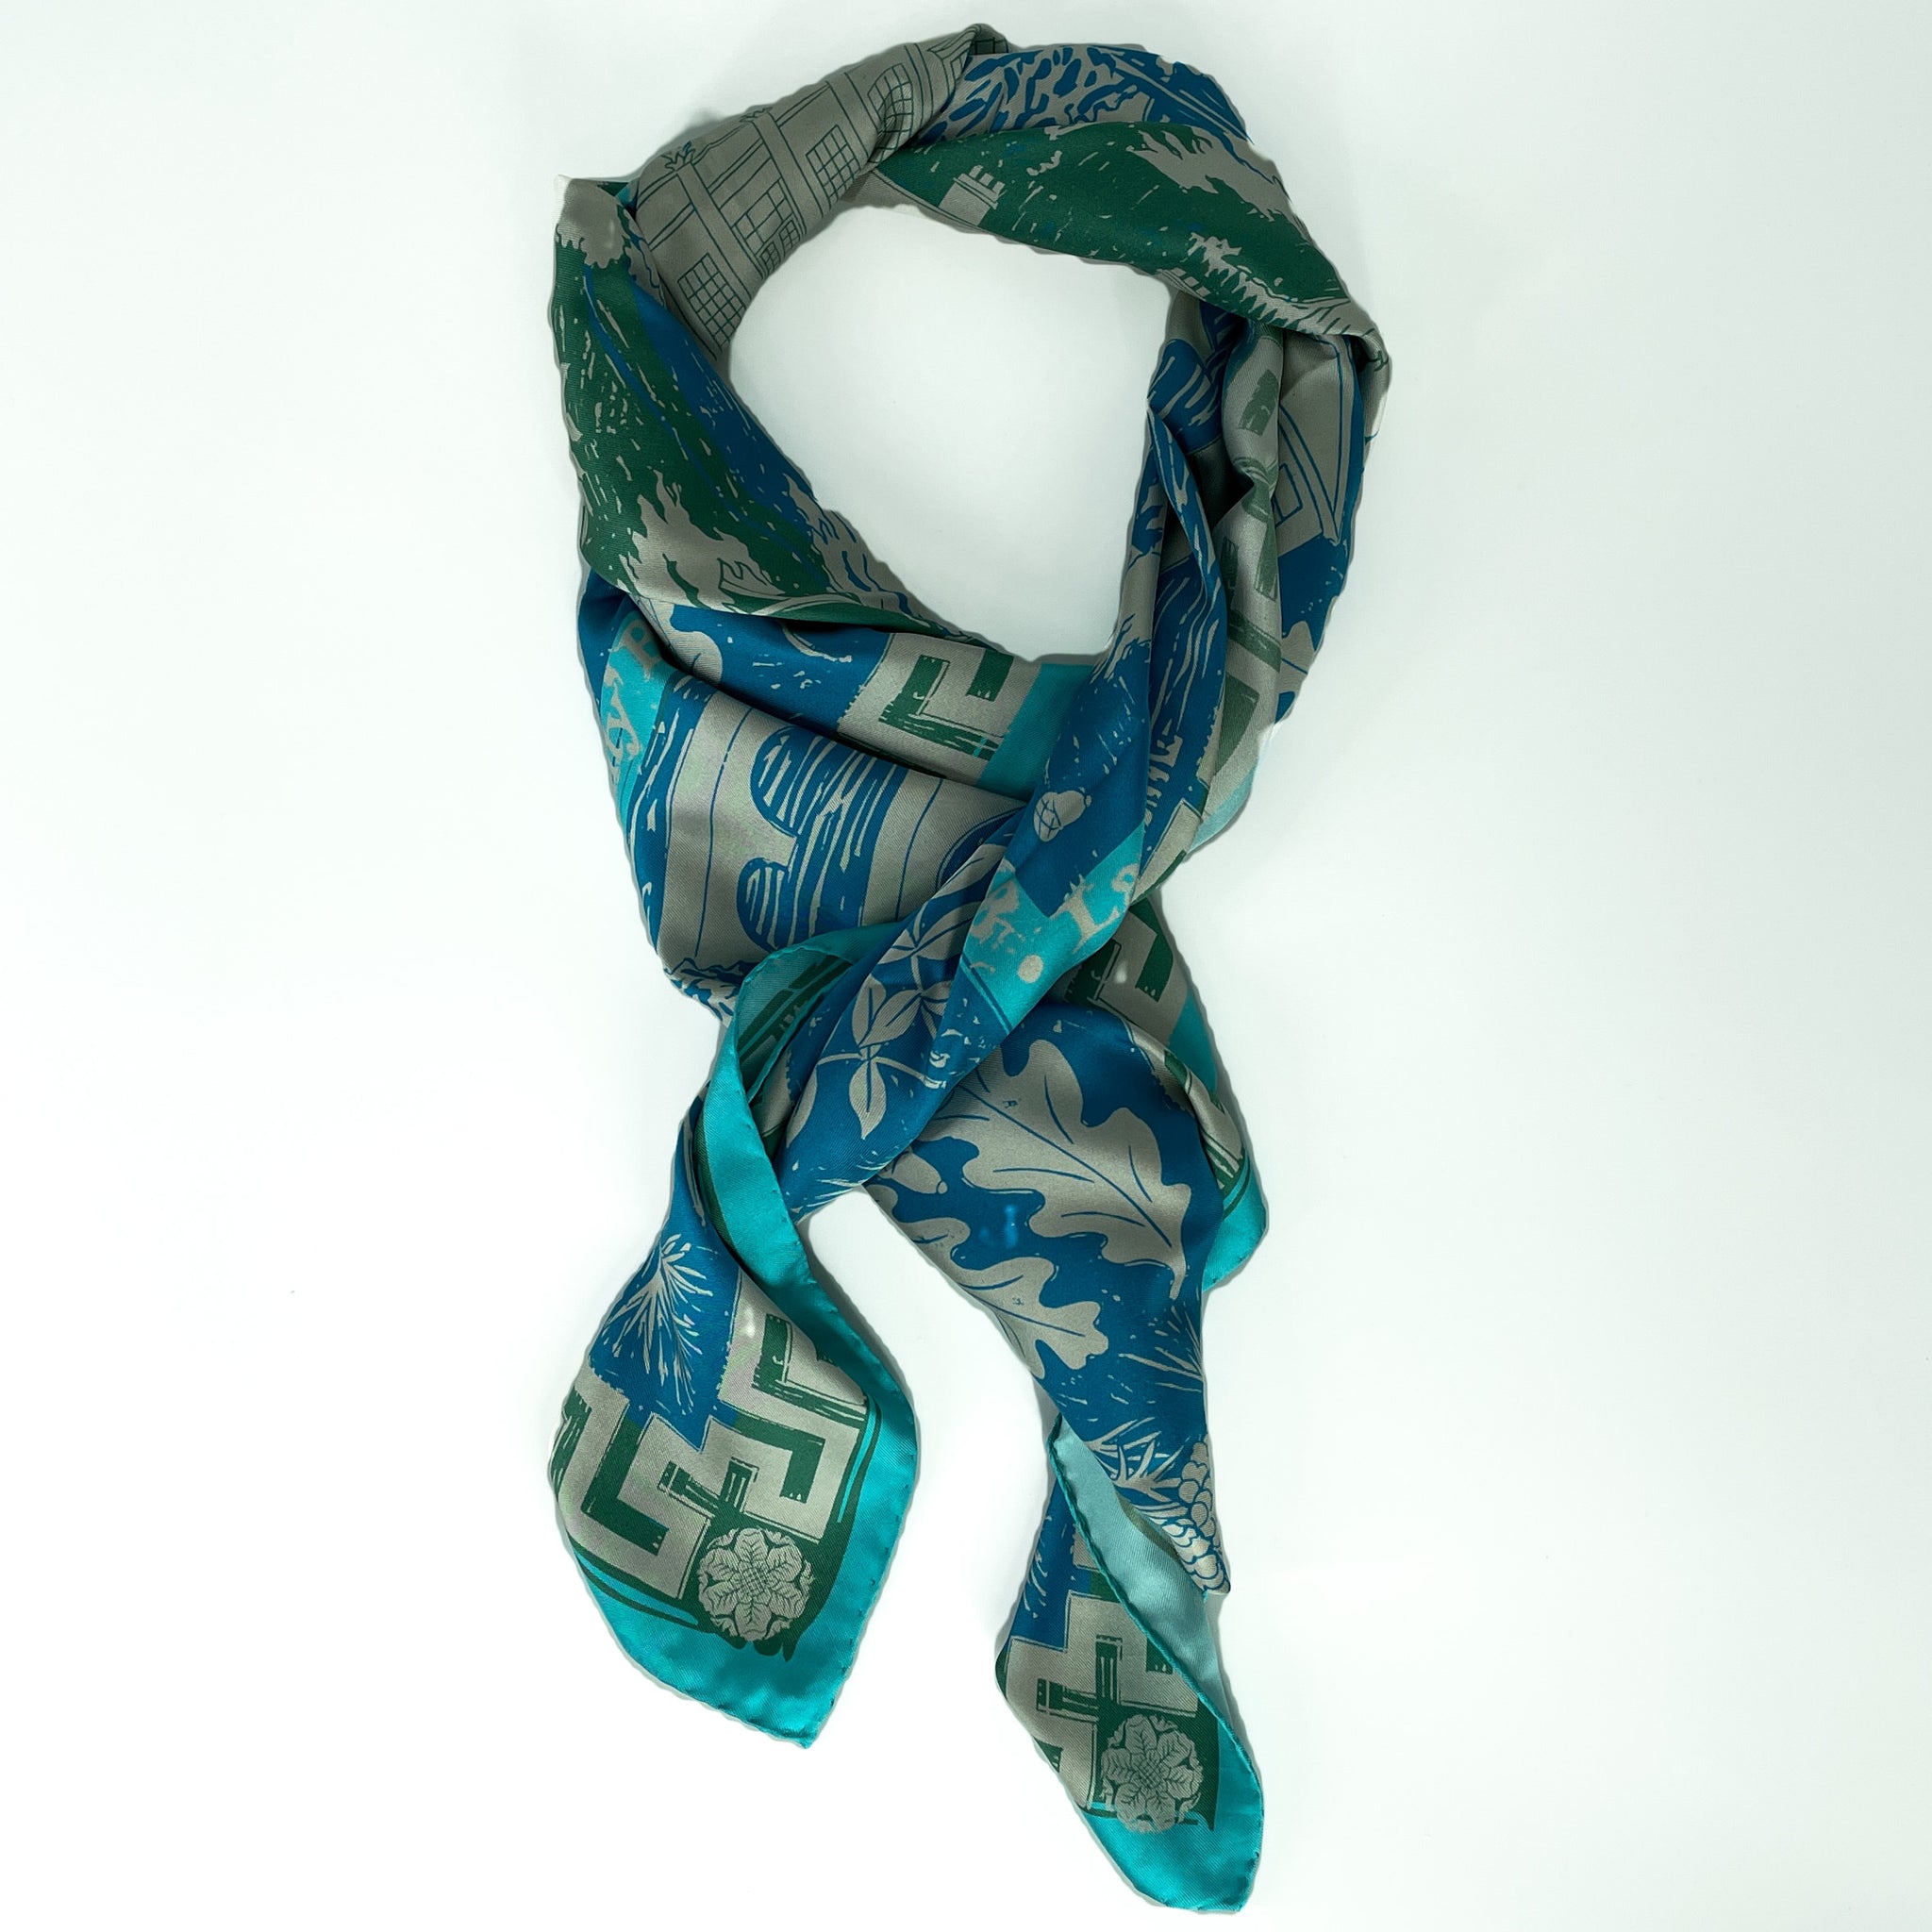 A silk scarf laid out in a knot shape with shades of light blue, dark blue, green and grey from the geometric design.